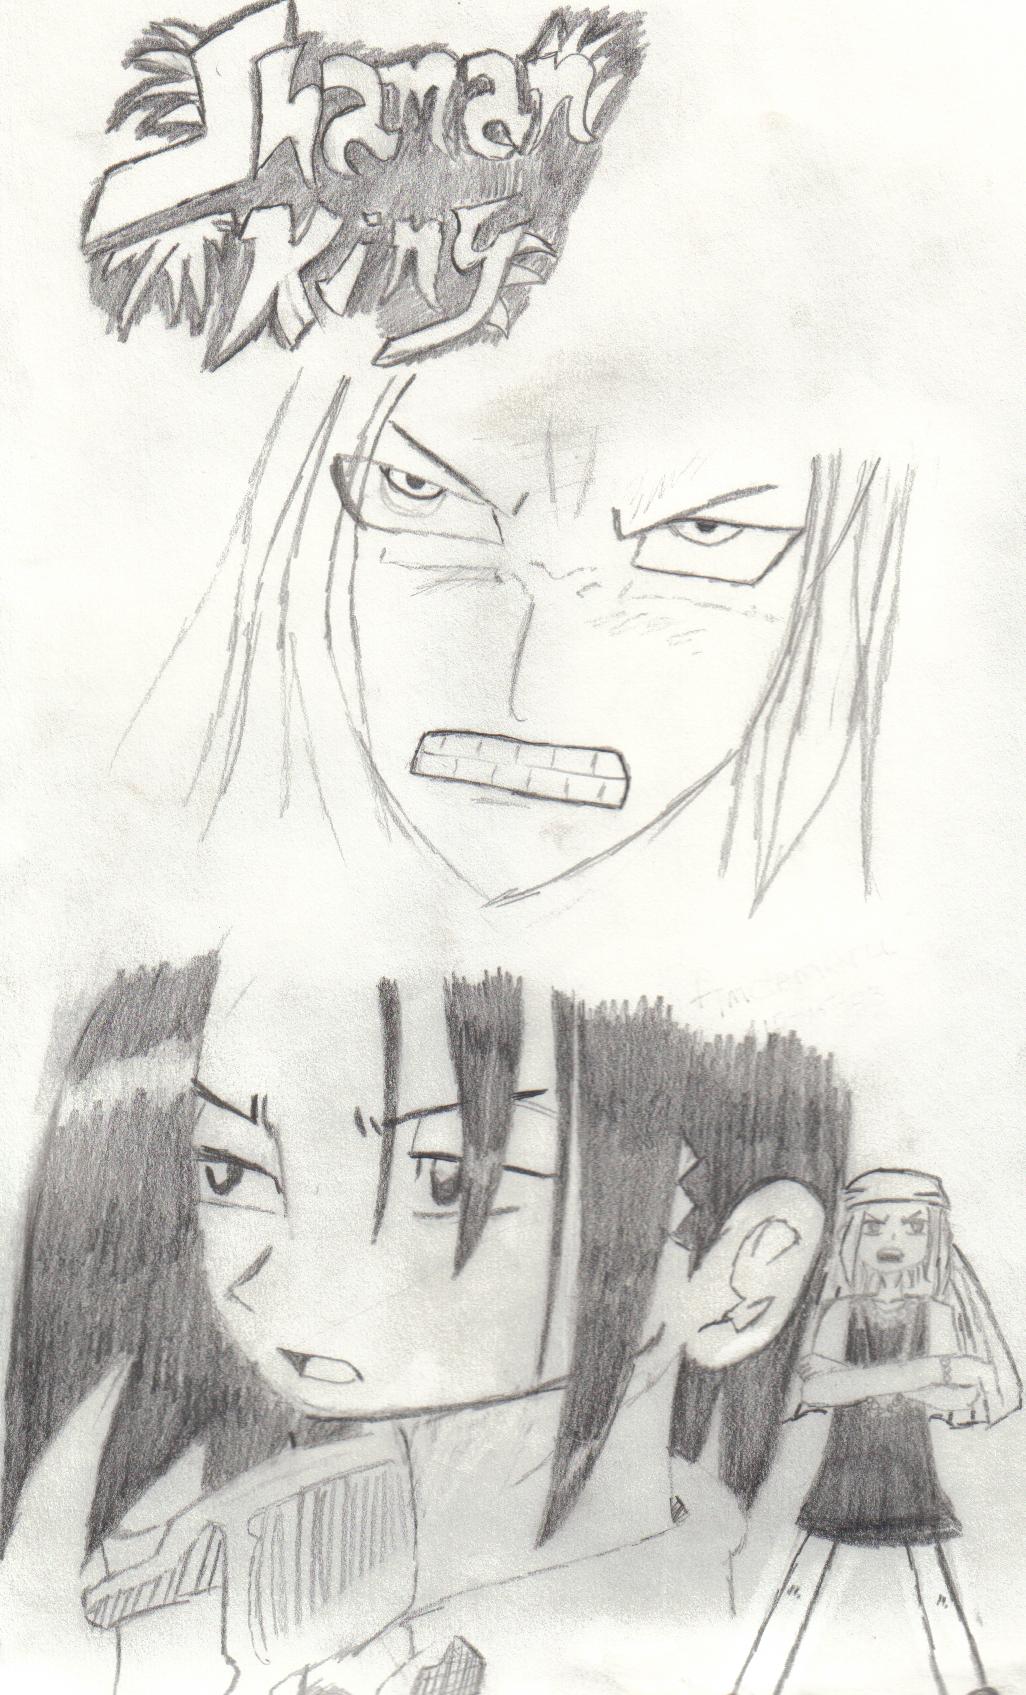 Shaman King possibly unfinished by Lady_Taiyoukai_of_the_West